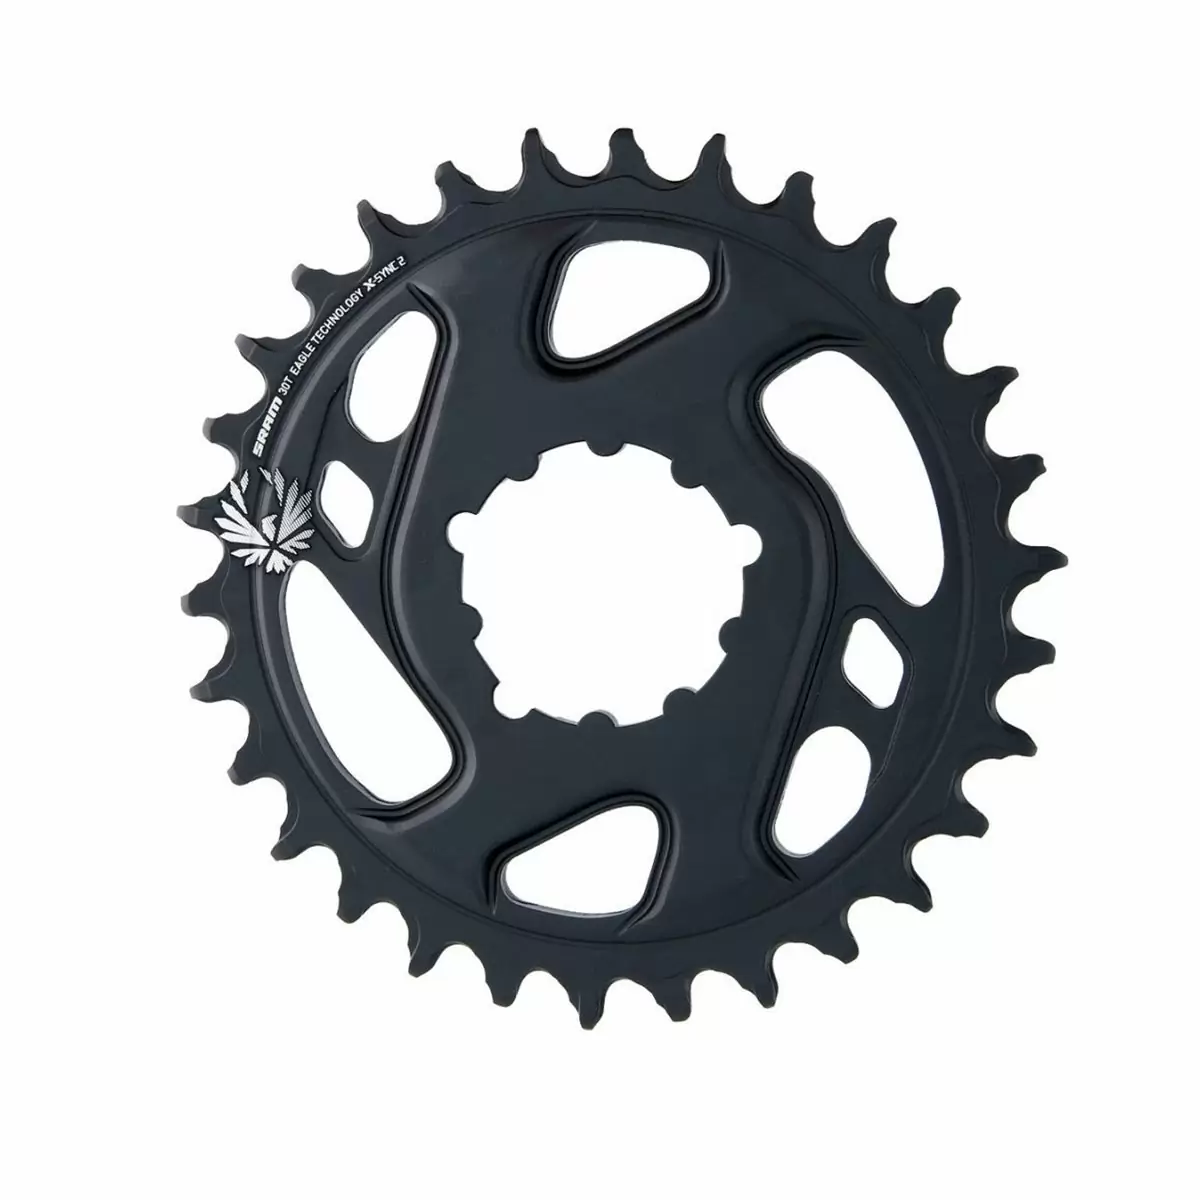 Chainring direct mount X-Sync 34t GX eagle 12v offset 6mm - image